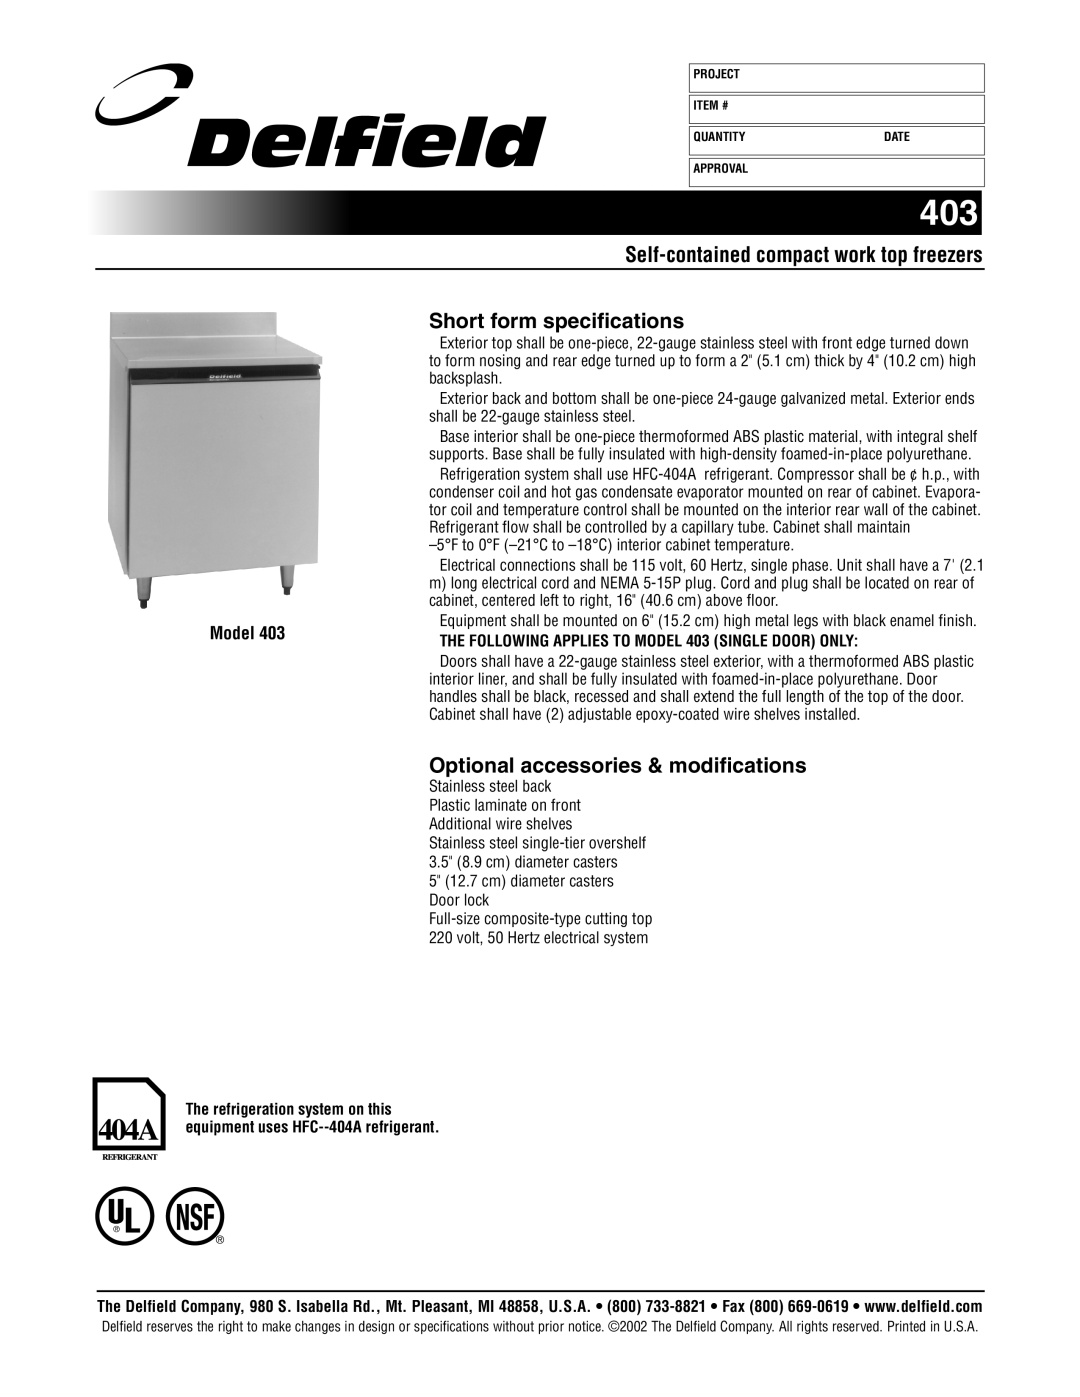 Delfield 403 Standard specifications Self-containedcompact work top freezers, Short form specifications, Model 